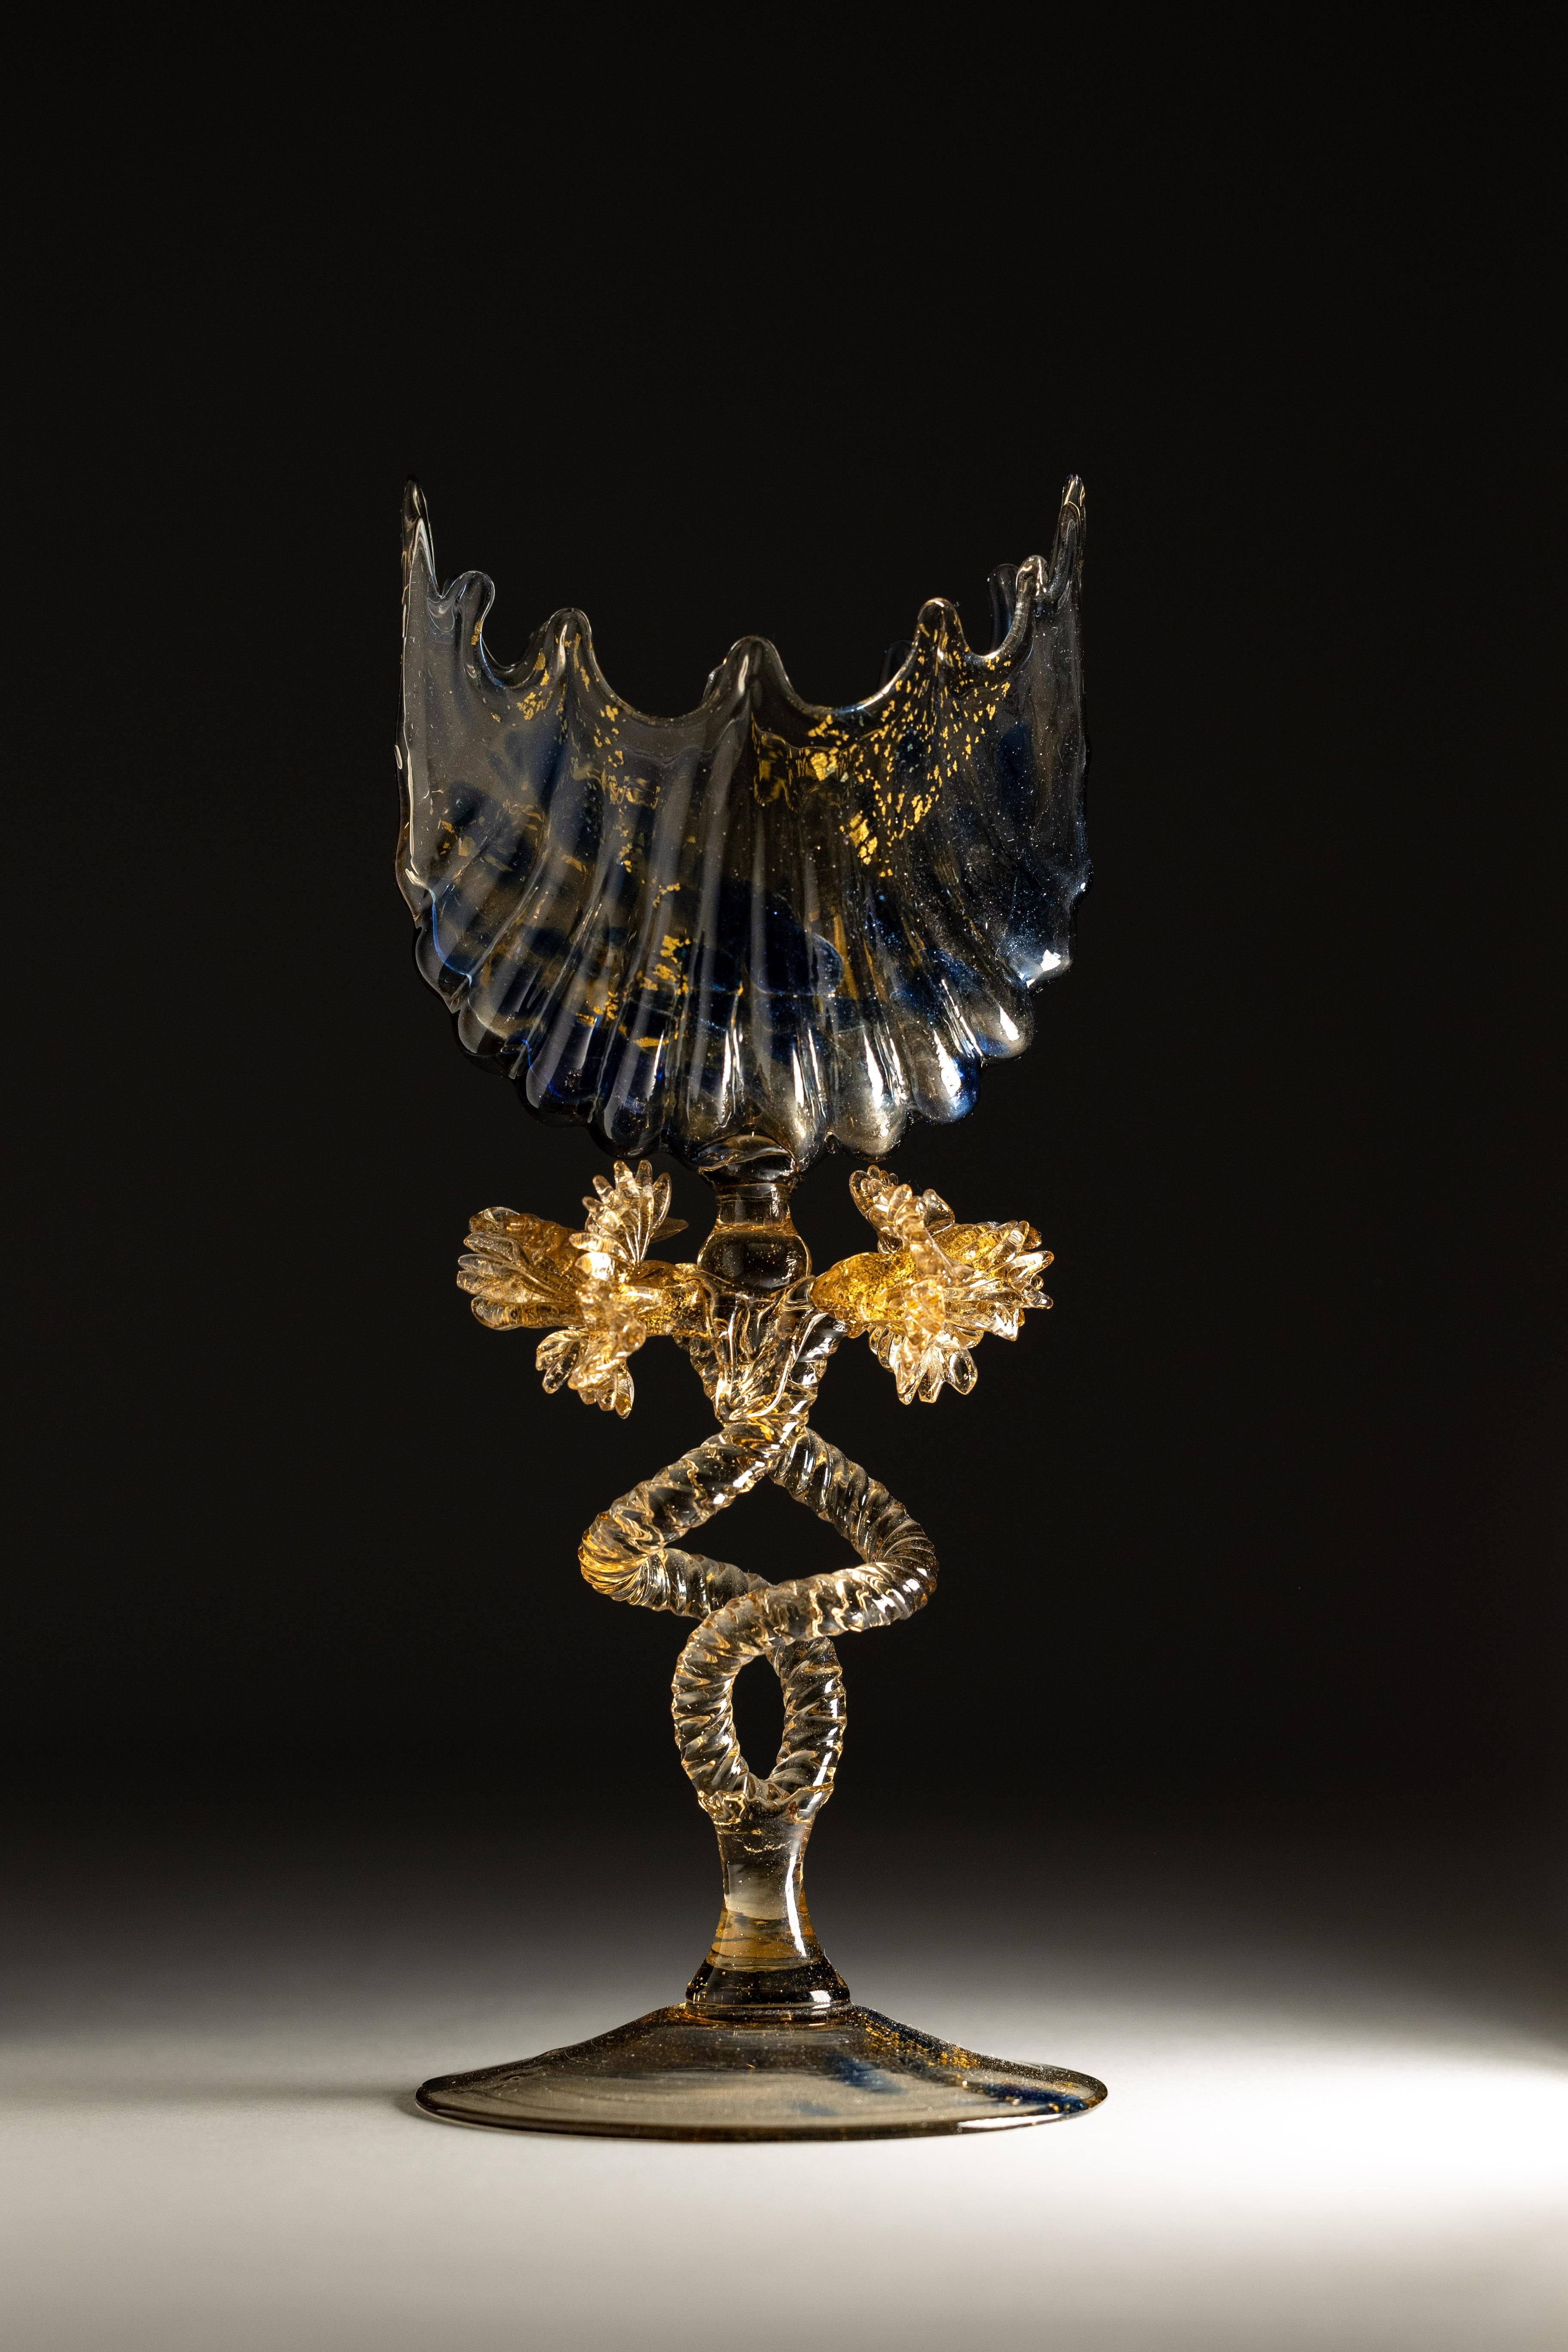 19th Century Salviati Venetian Murano Glass Goblet In Excellent Condition For Sale In Fort Lauderdale, FL